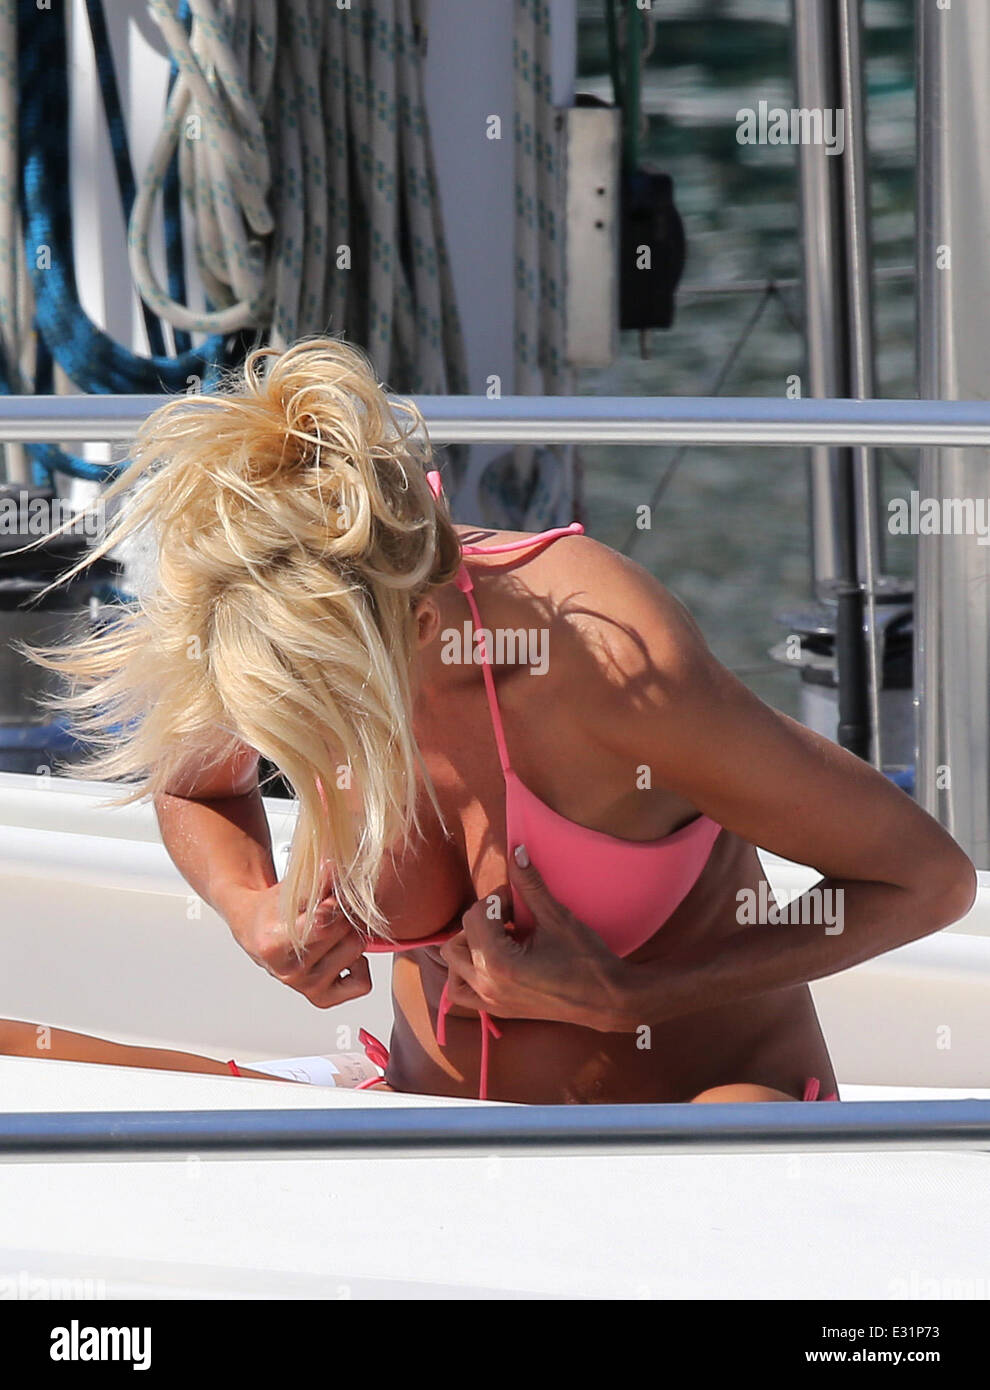 Victoria Silvstedt Sunbathes On Her Yacht In The Port Of Beaulieu In The French Riviera